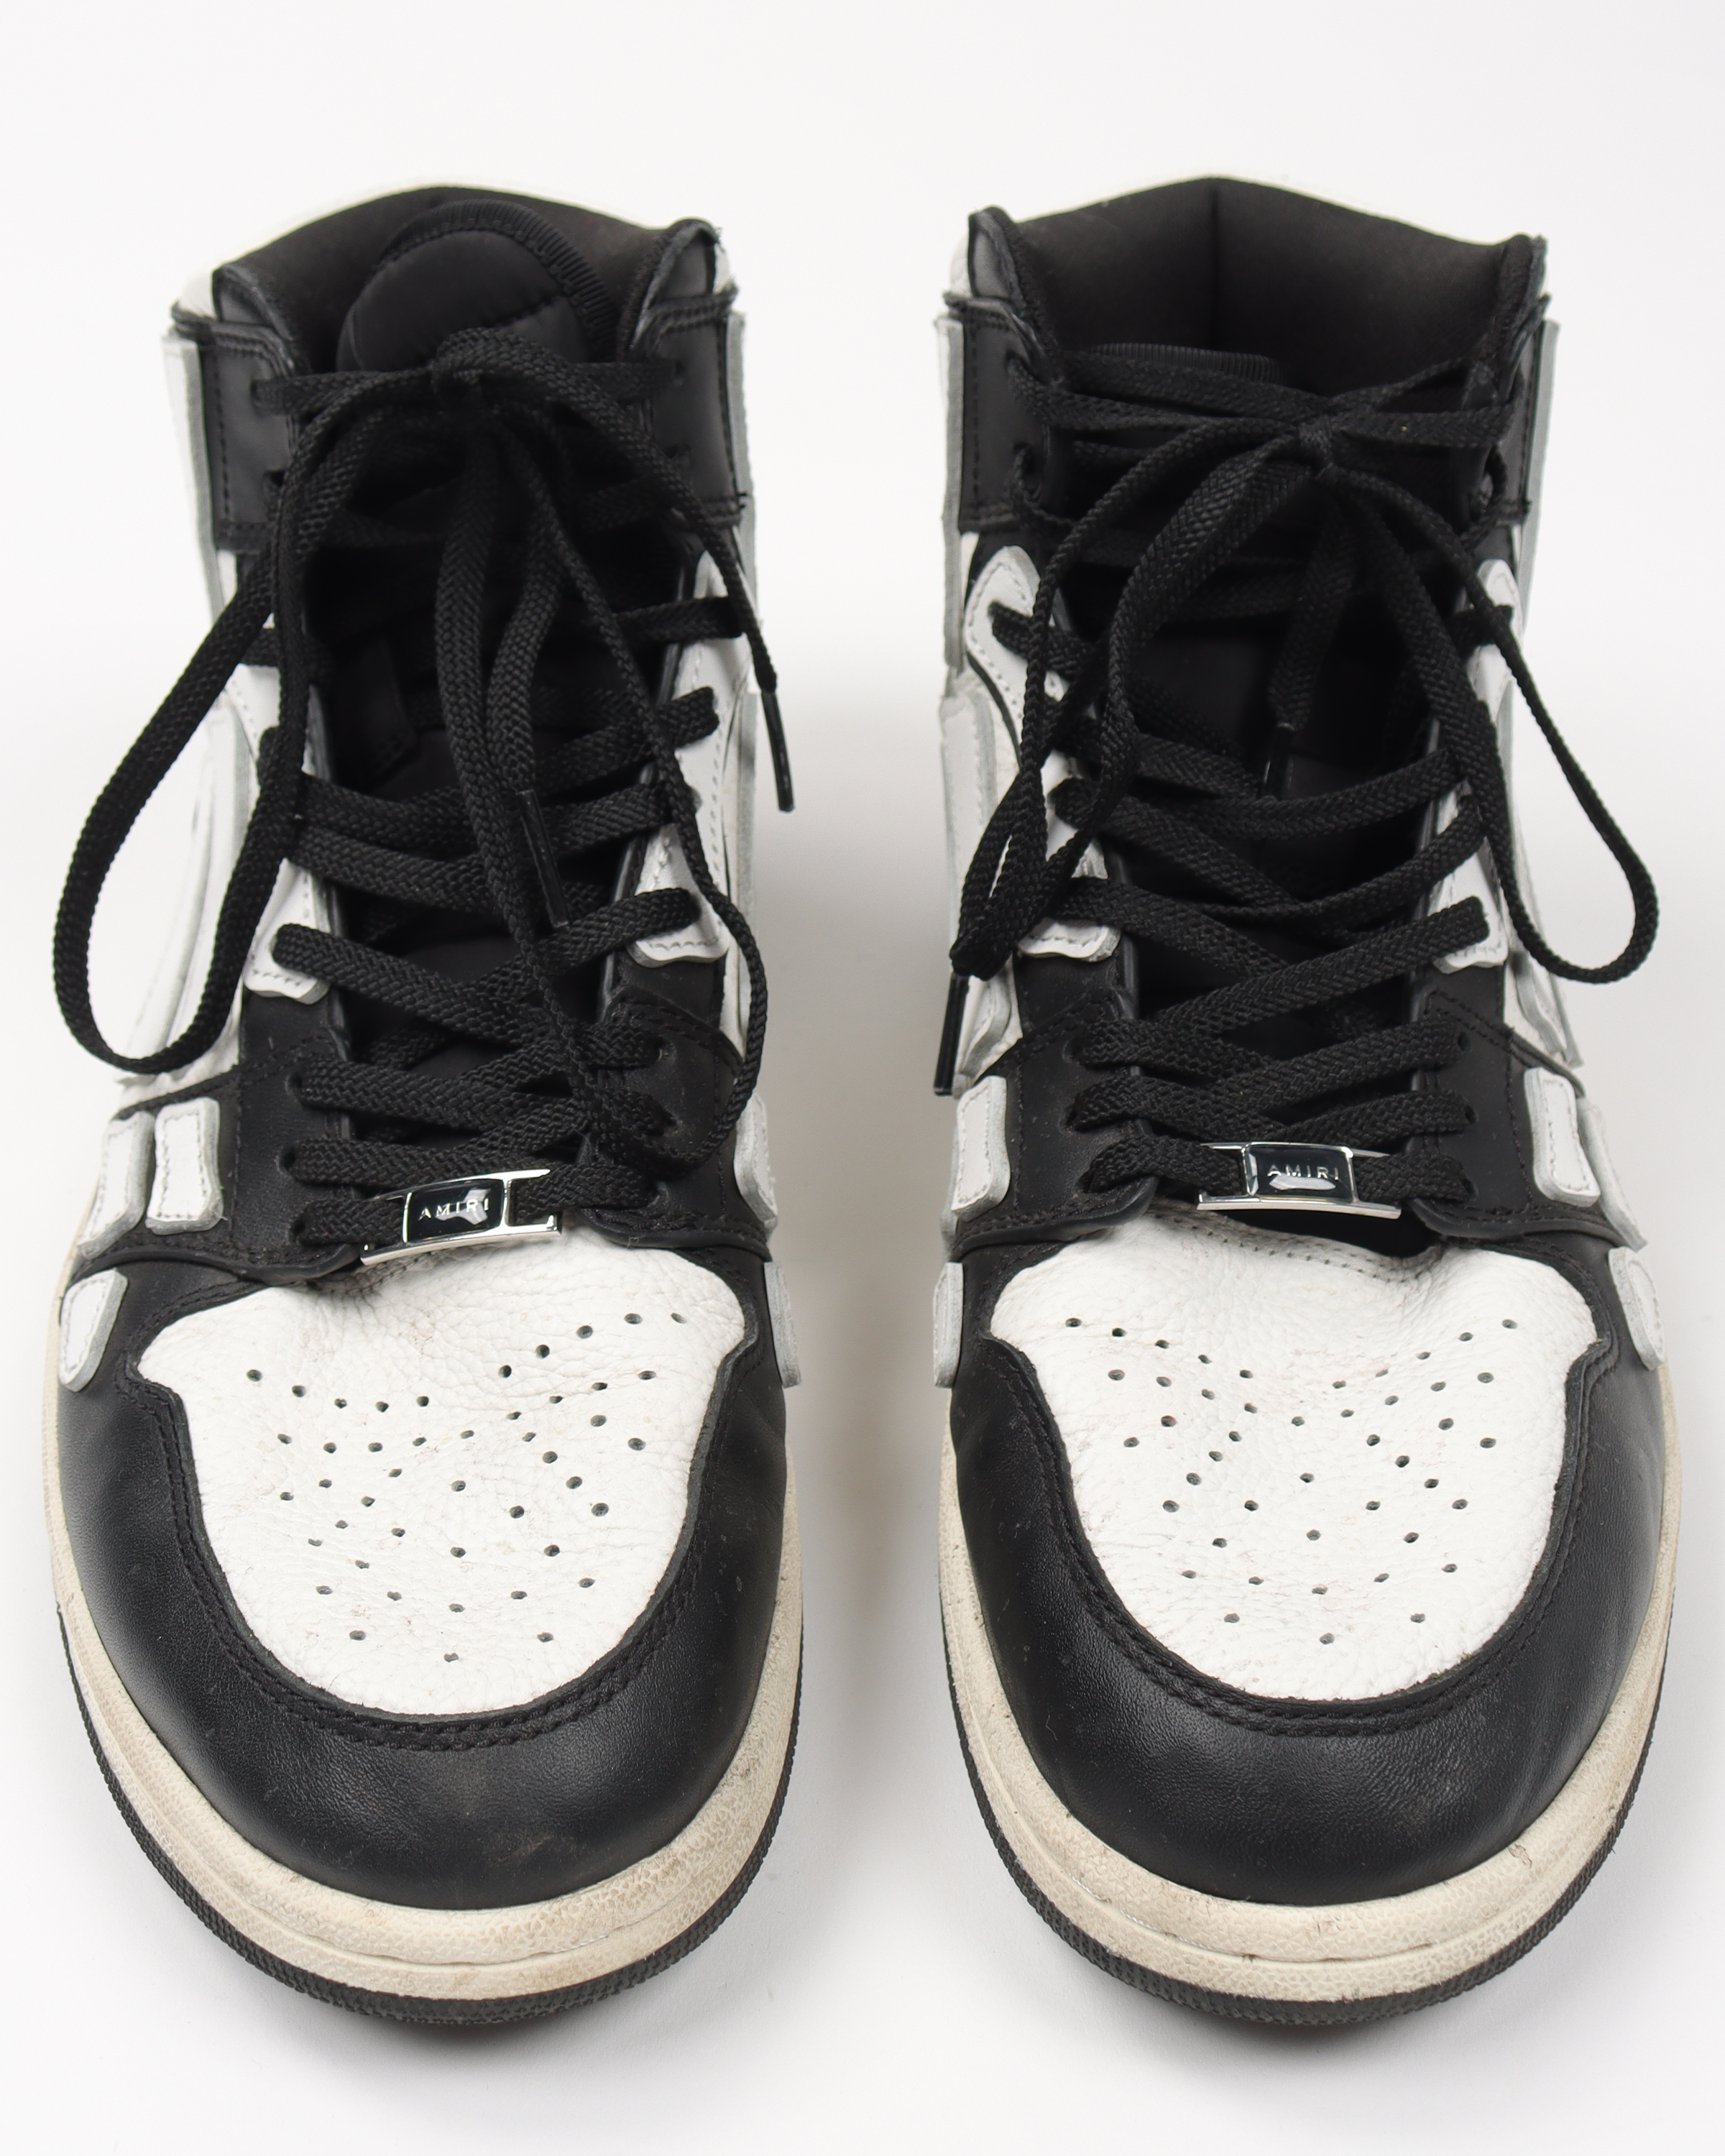 Black and White Skeleton High-Top Sneakers